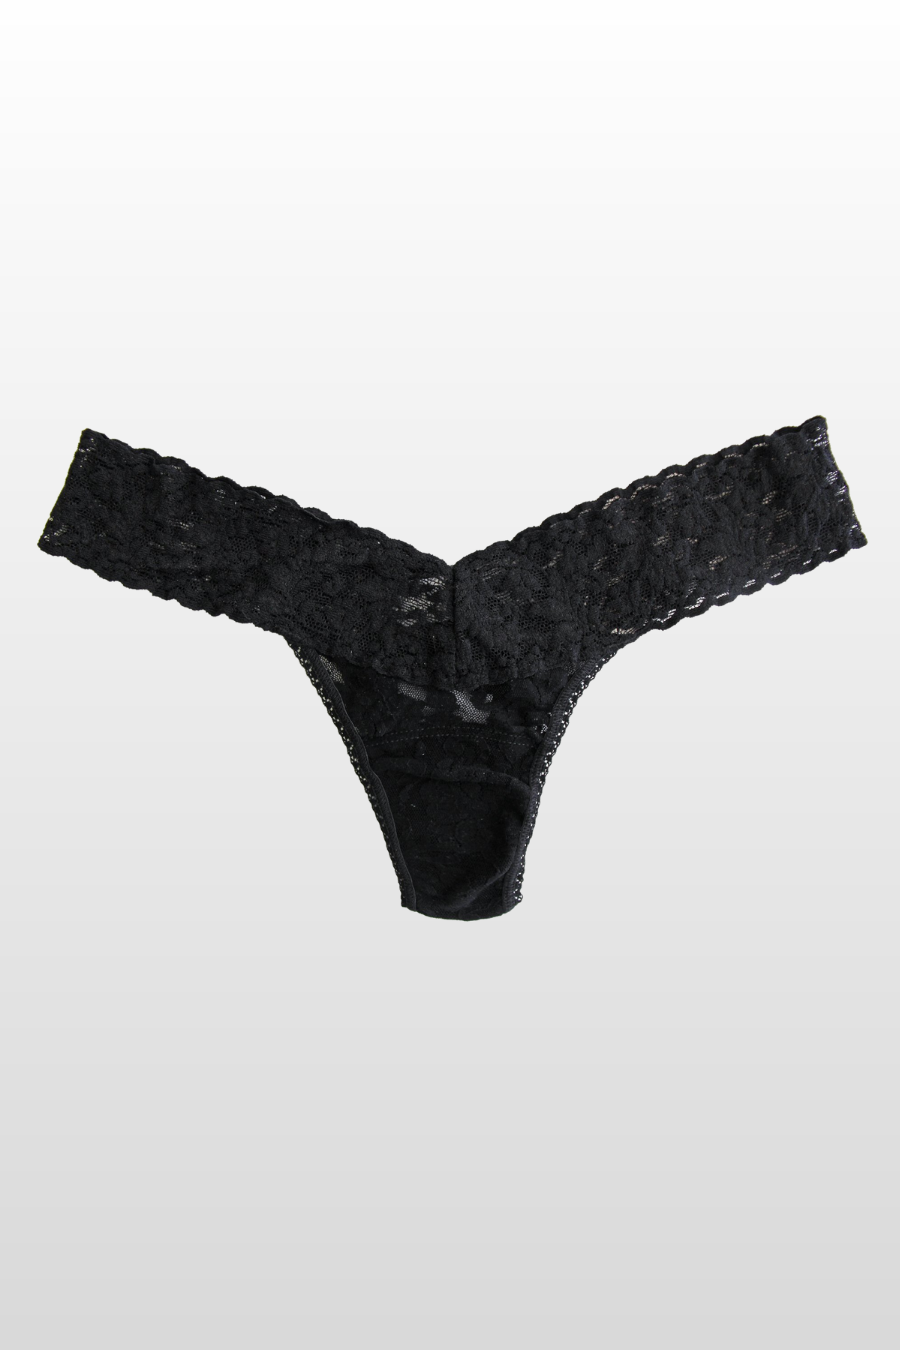 Lace Low Rise Thong